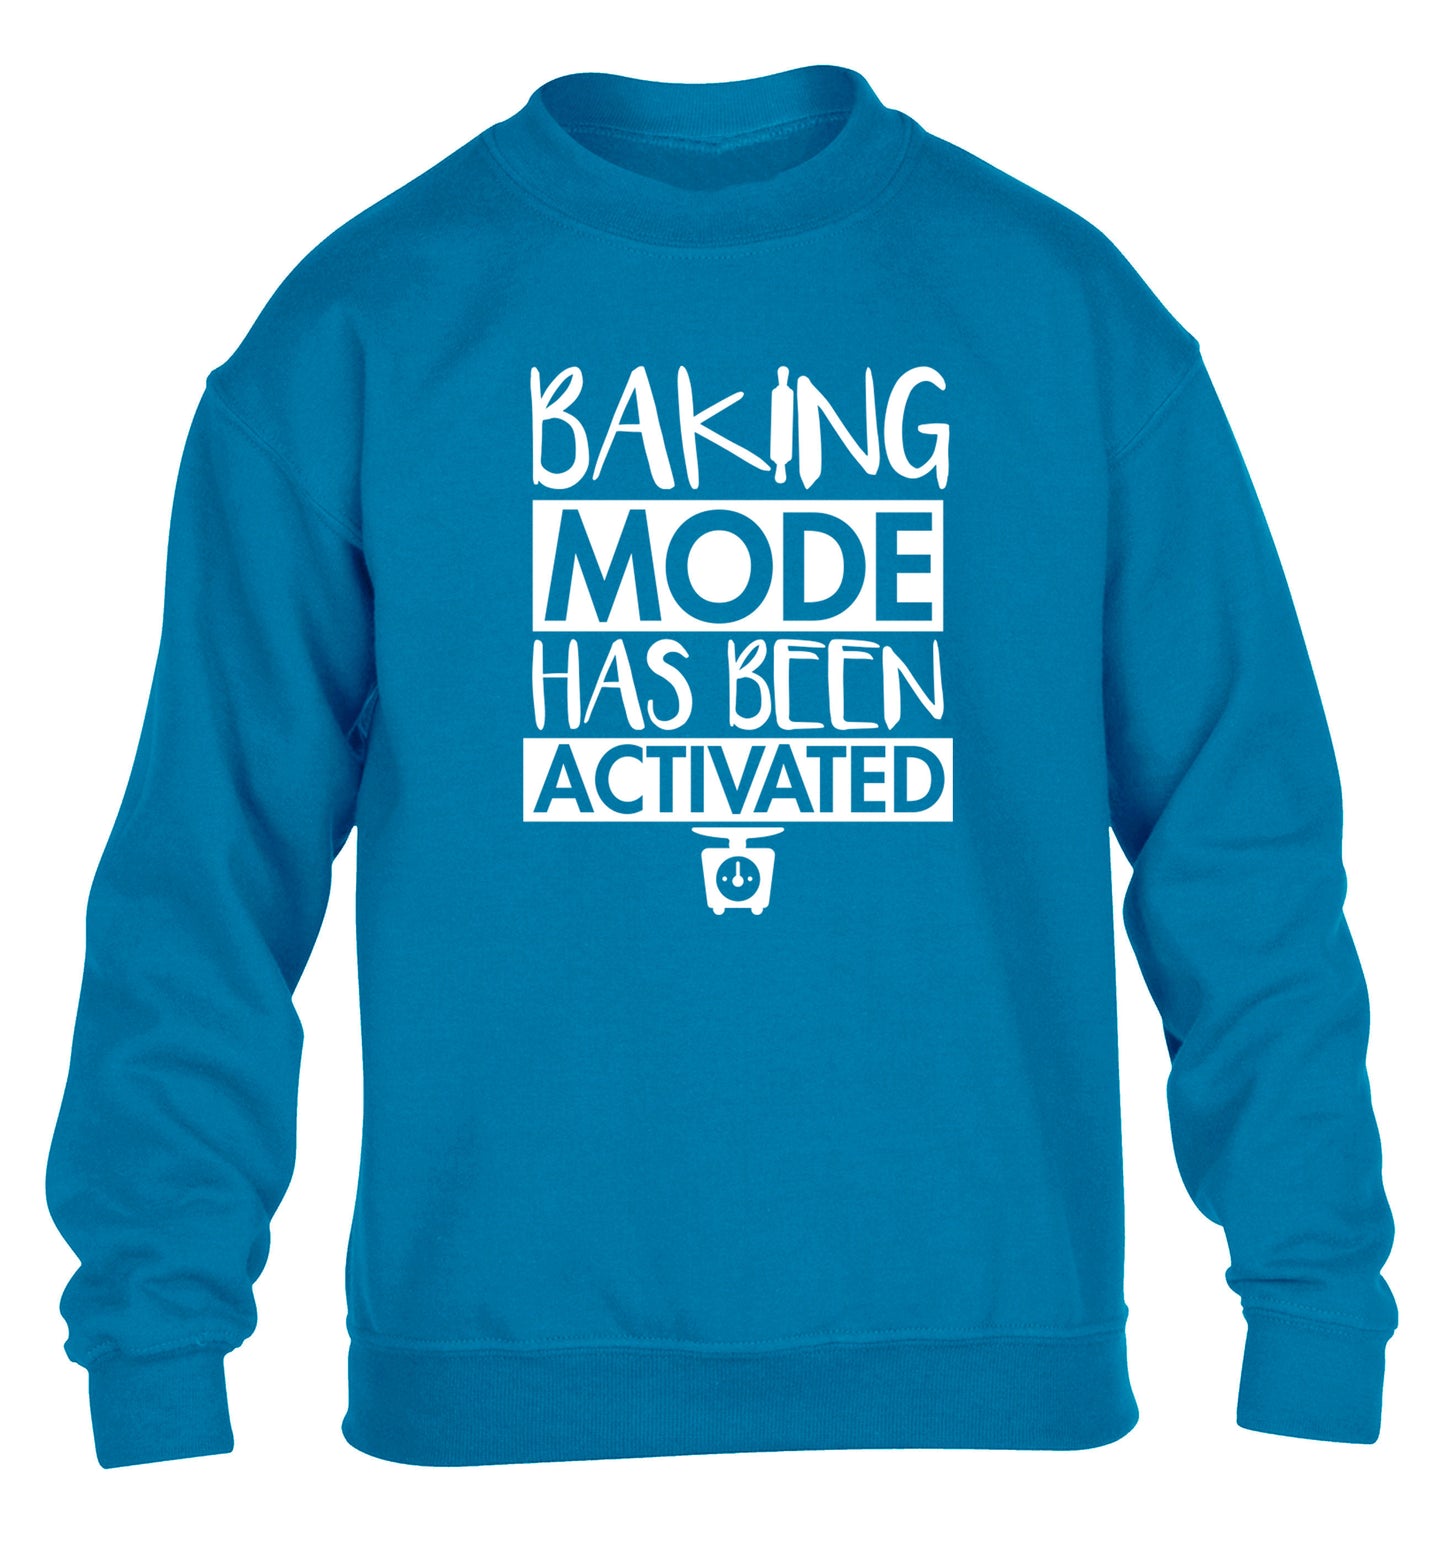 Baking mode has been activated children's blue sweater 12-14 Years